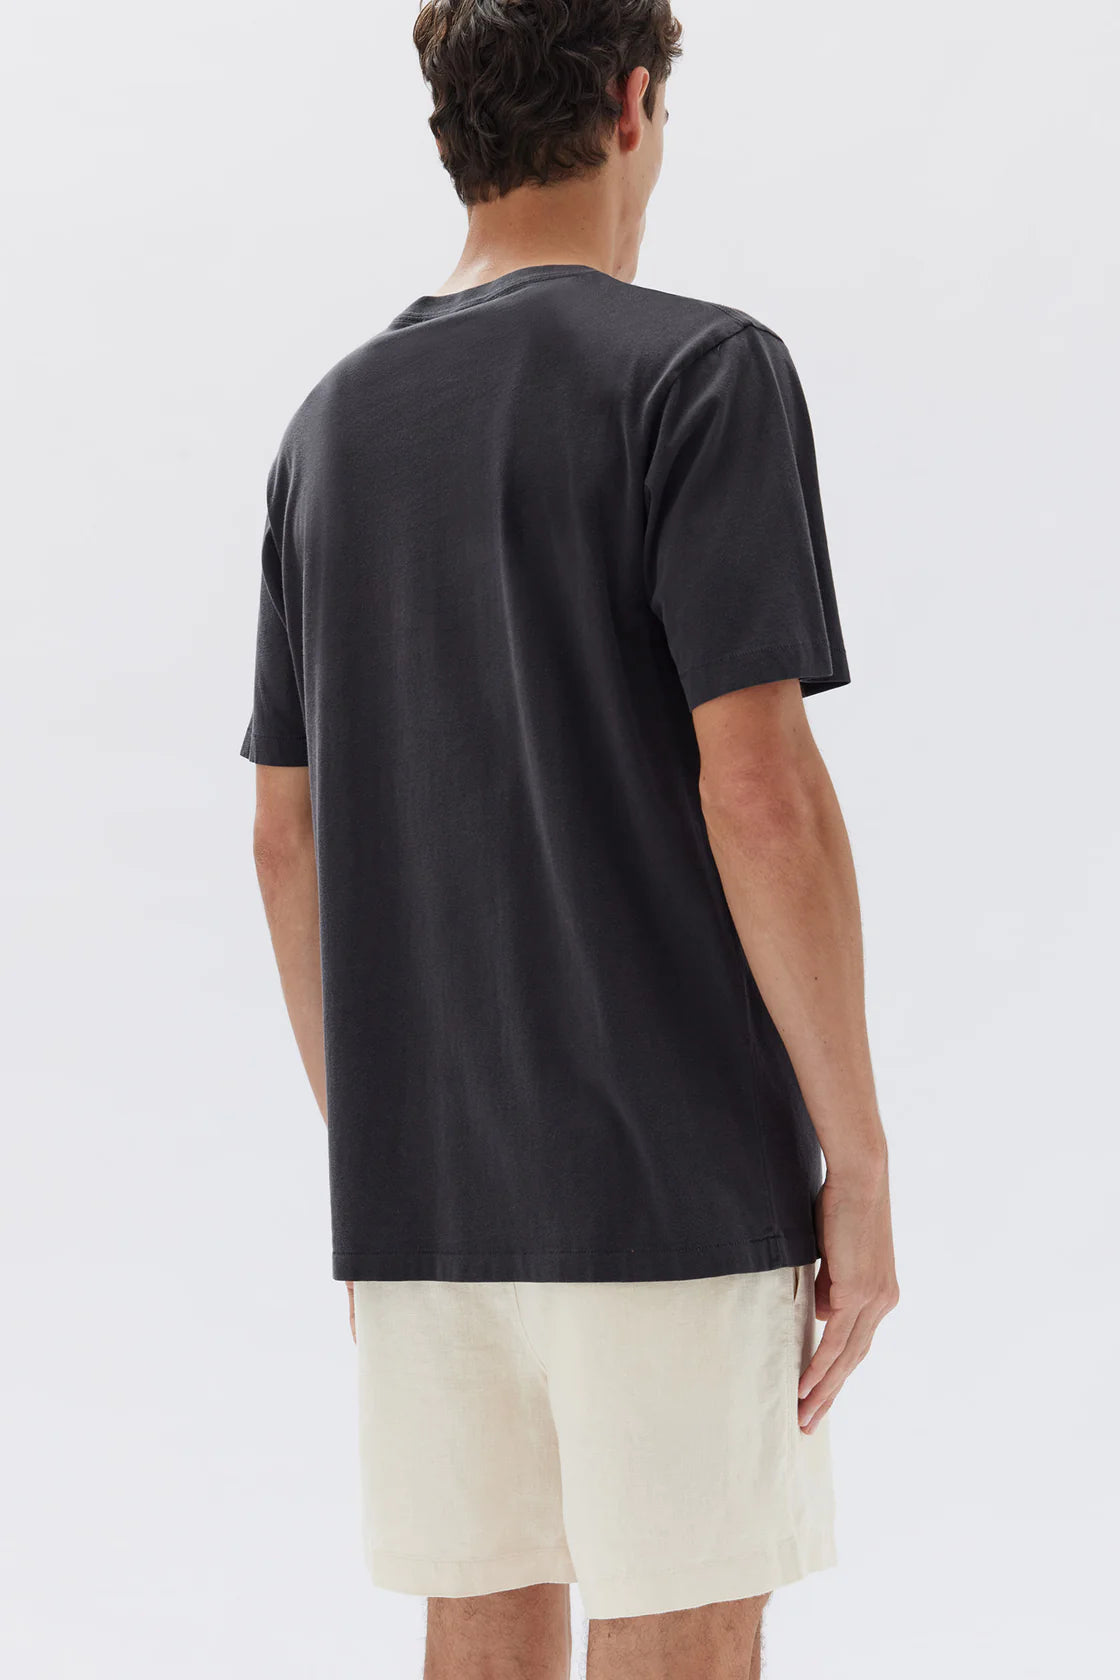 ASSEMBLY LABEL // Mens Everyday Logo Tee WASHED BLACK